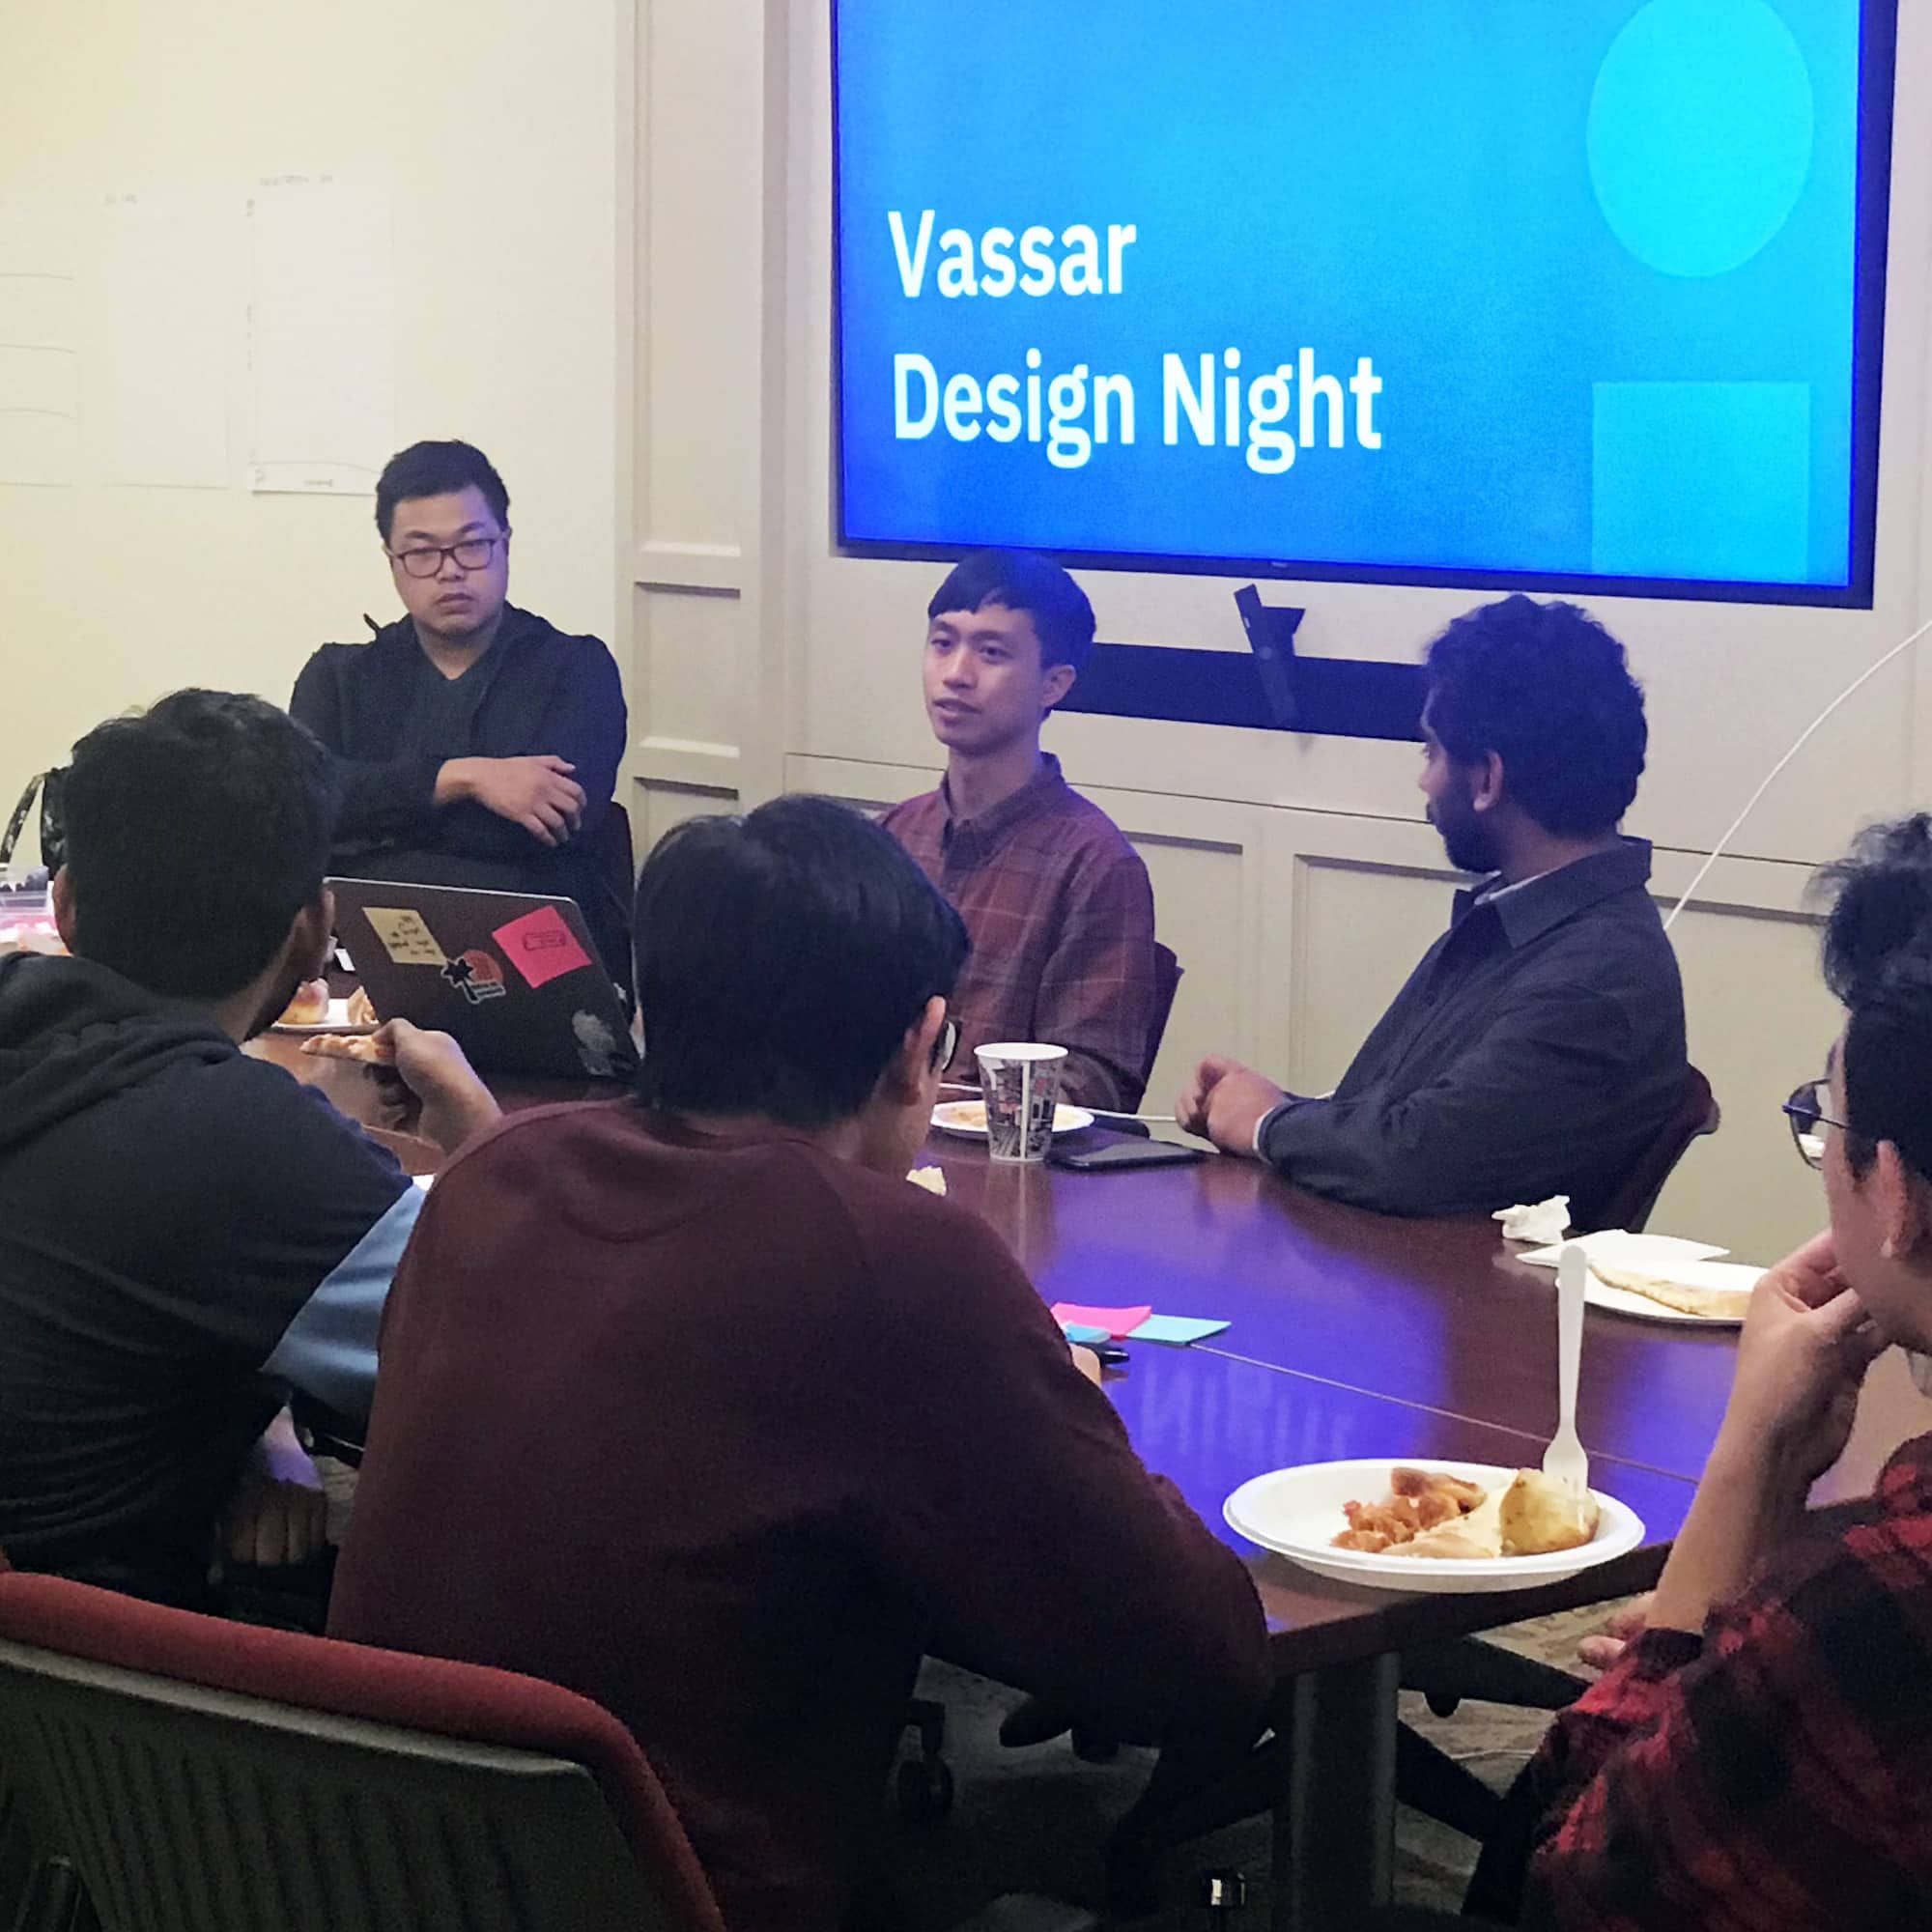 A group of young people are seated around a table, talking, with a projection behind them that reads Vassar Design Night.